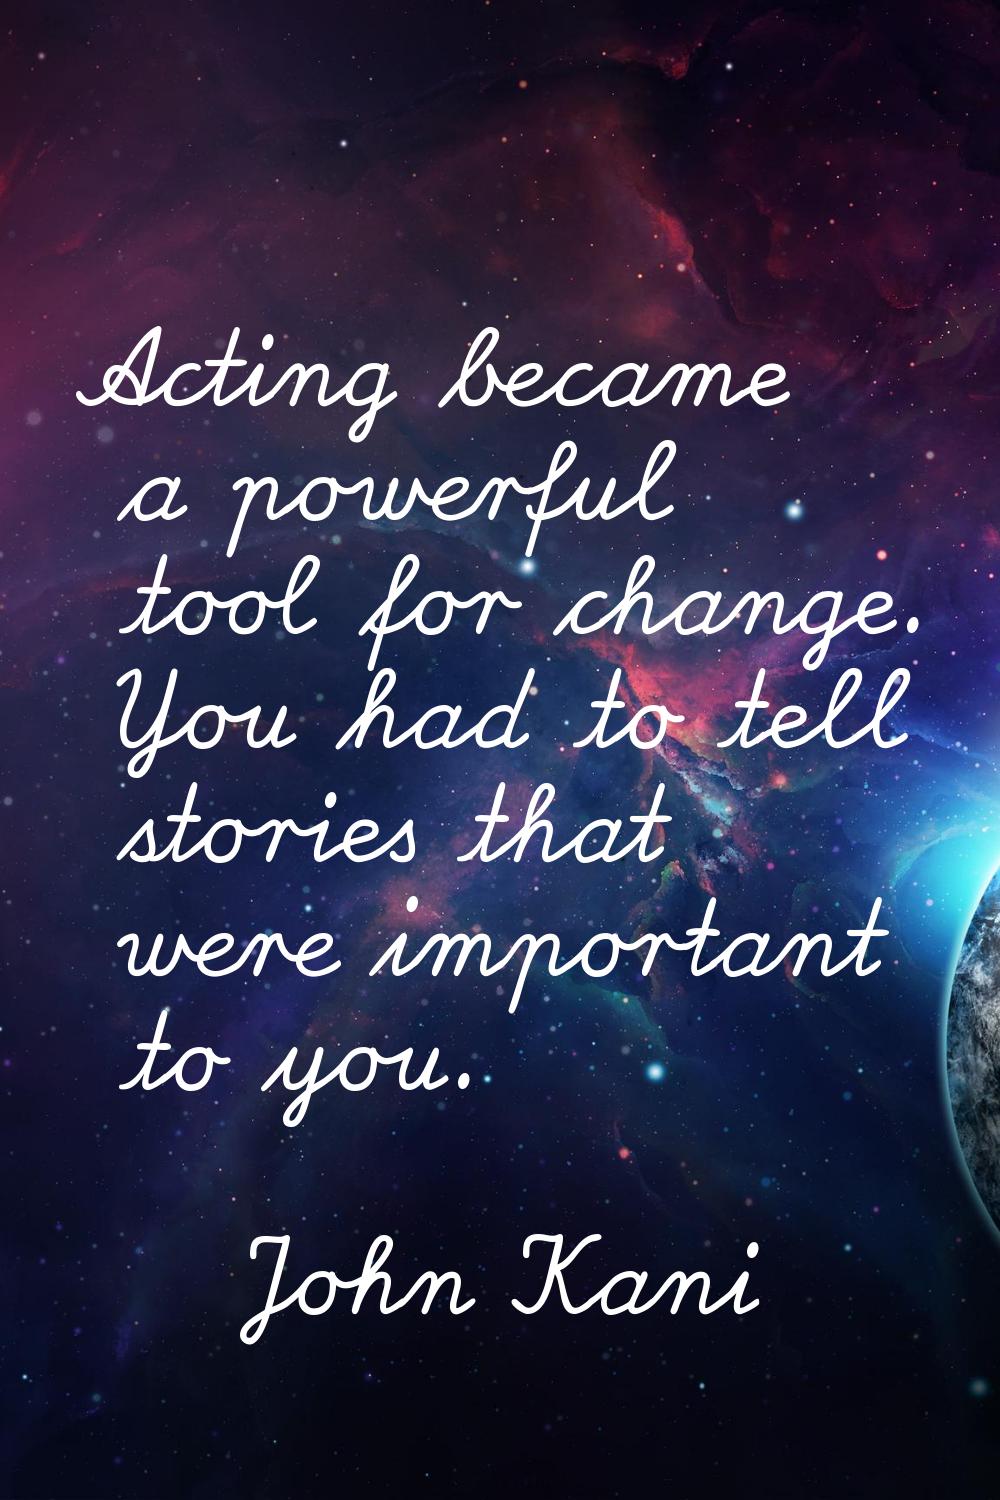 Acting became a powerful tool for change. You had to tell stories that were important to you.